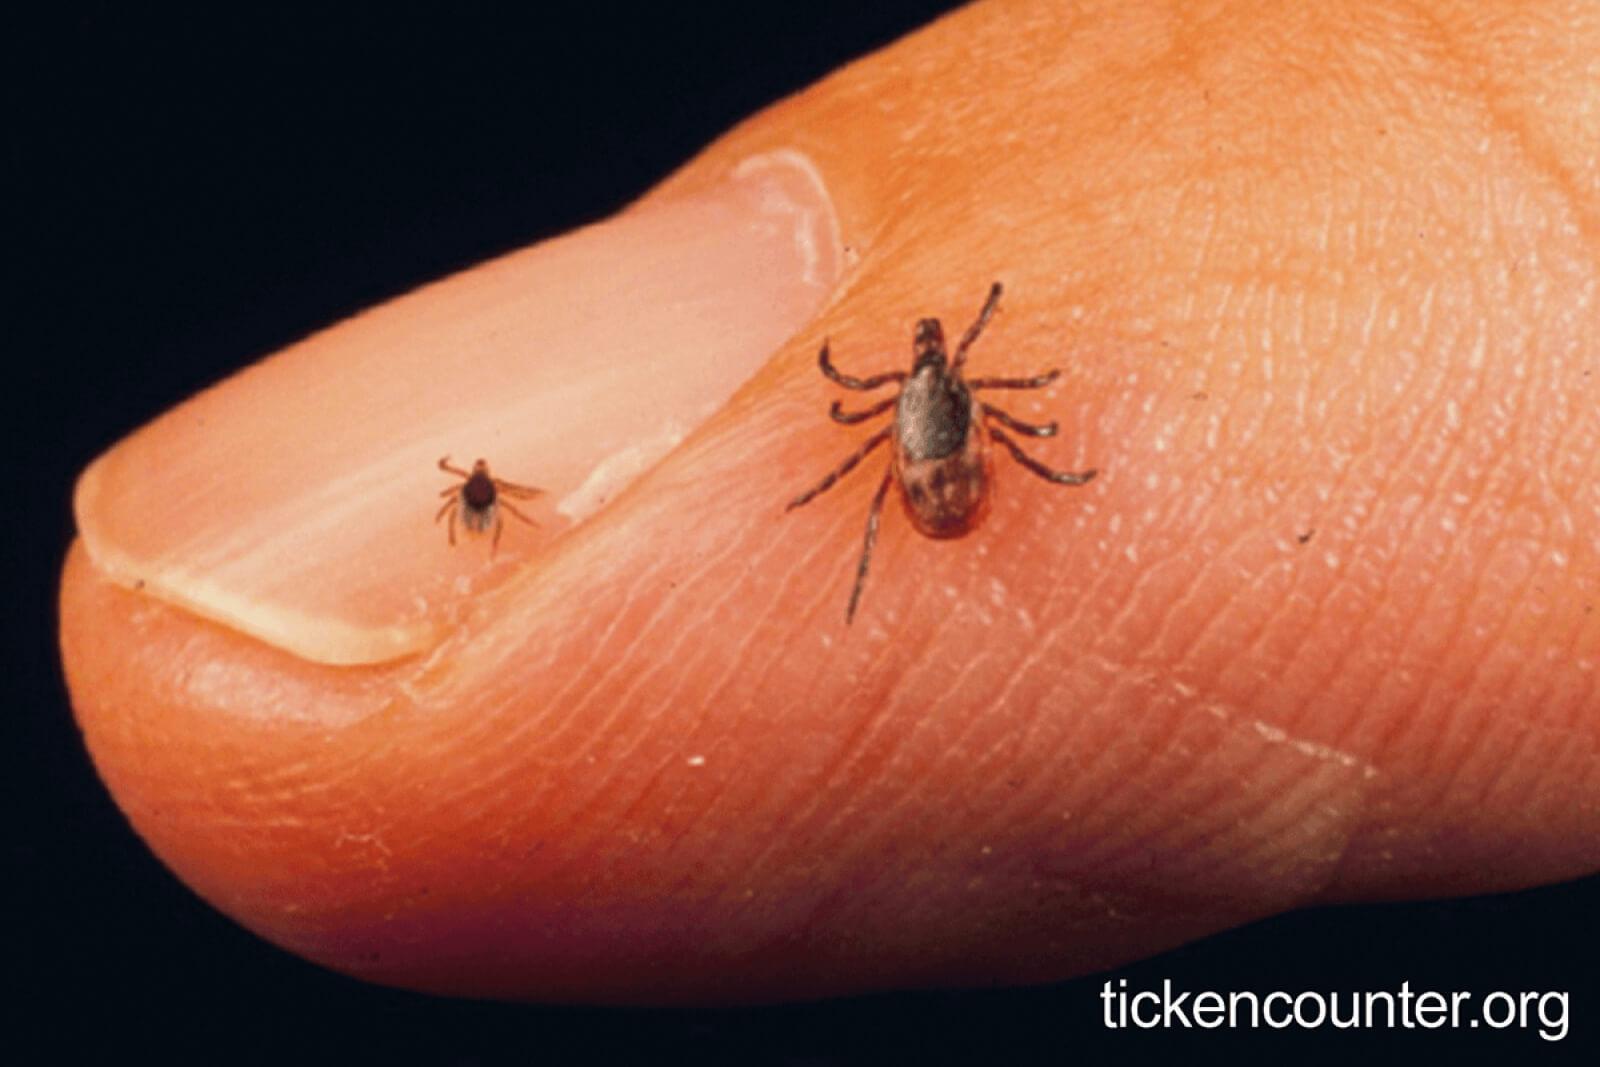 Watch out for ticks this season